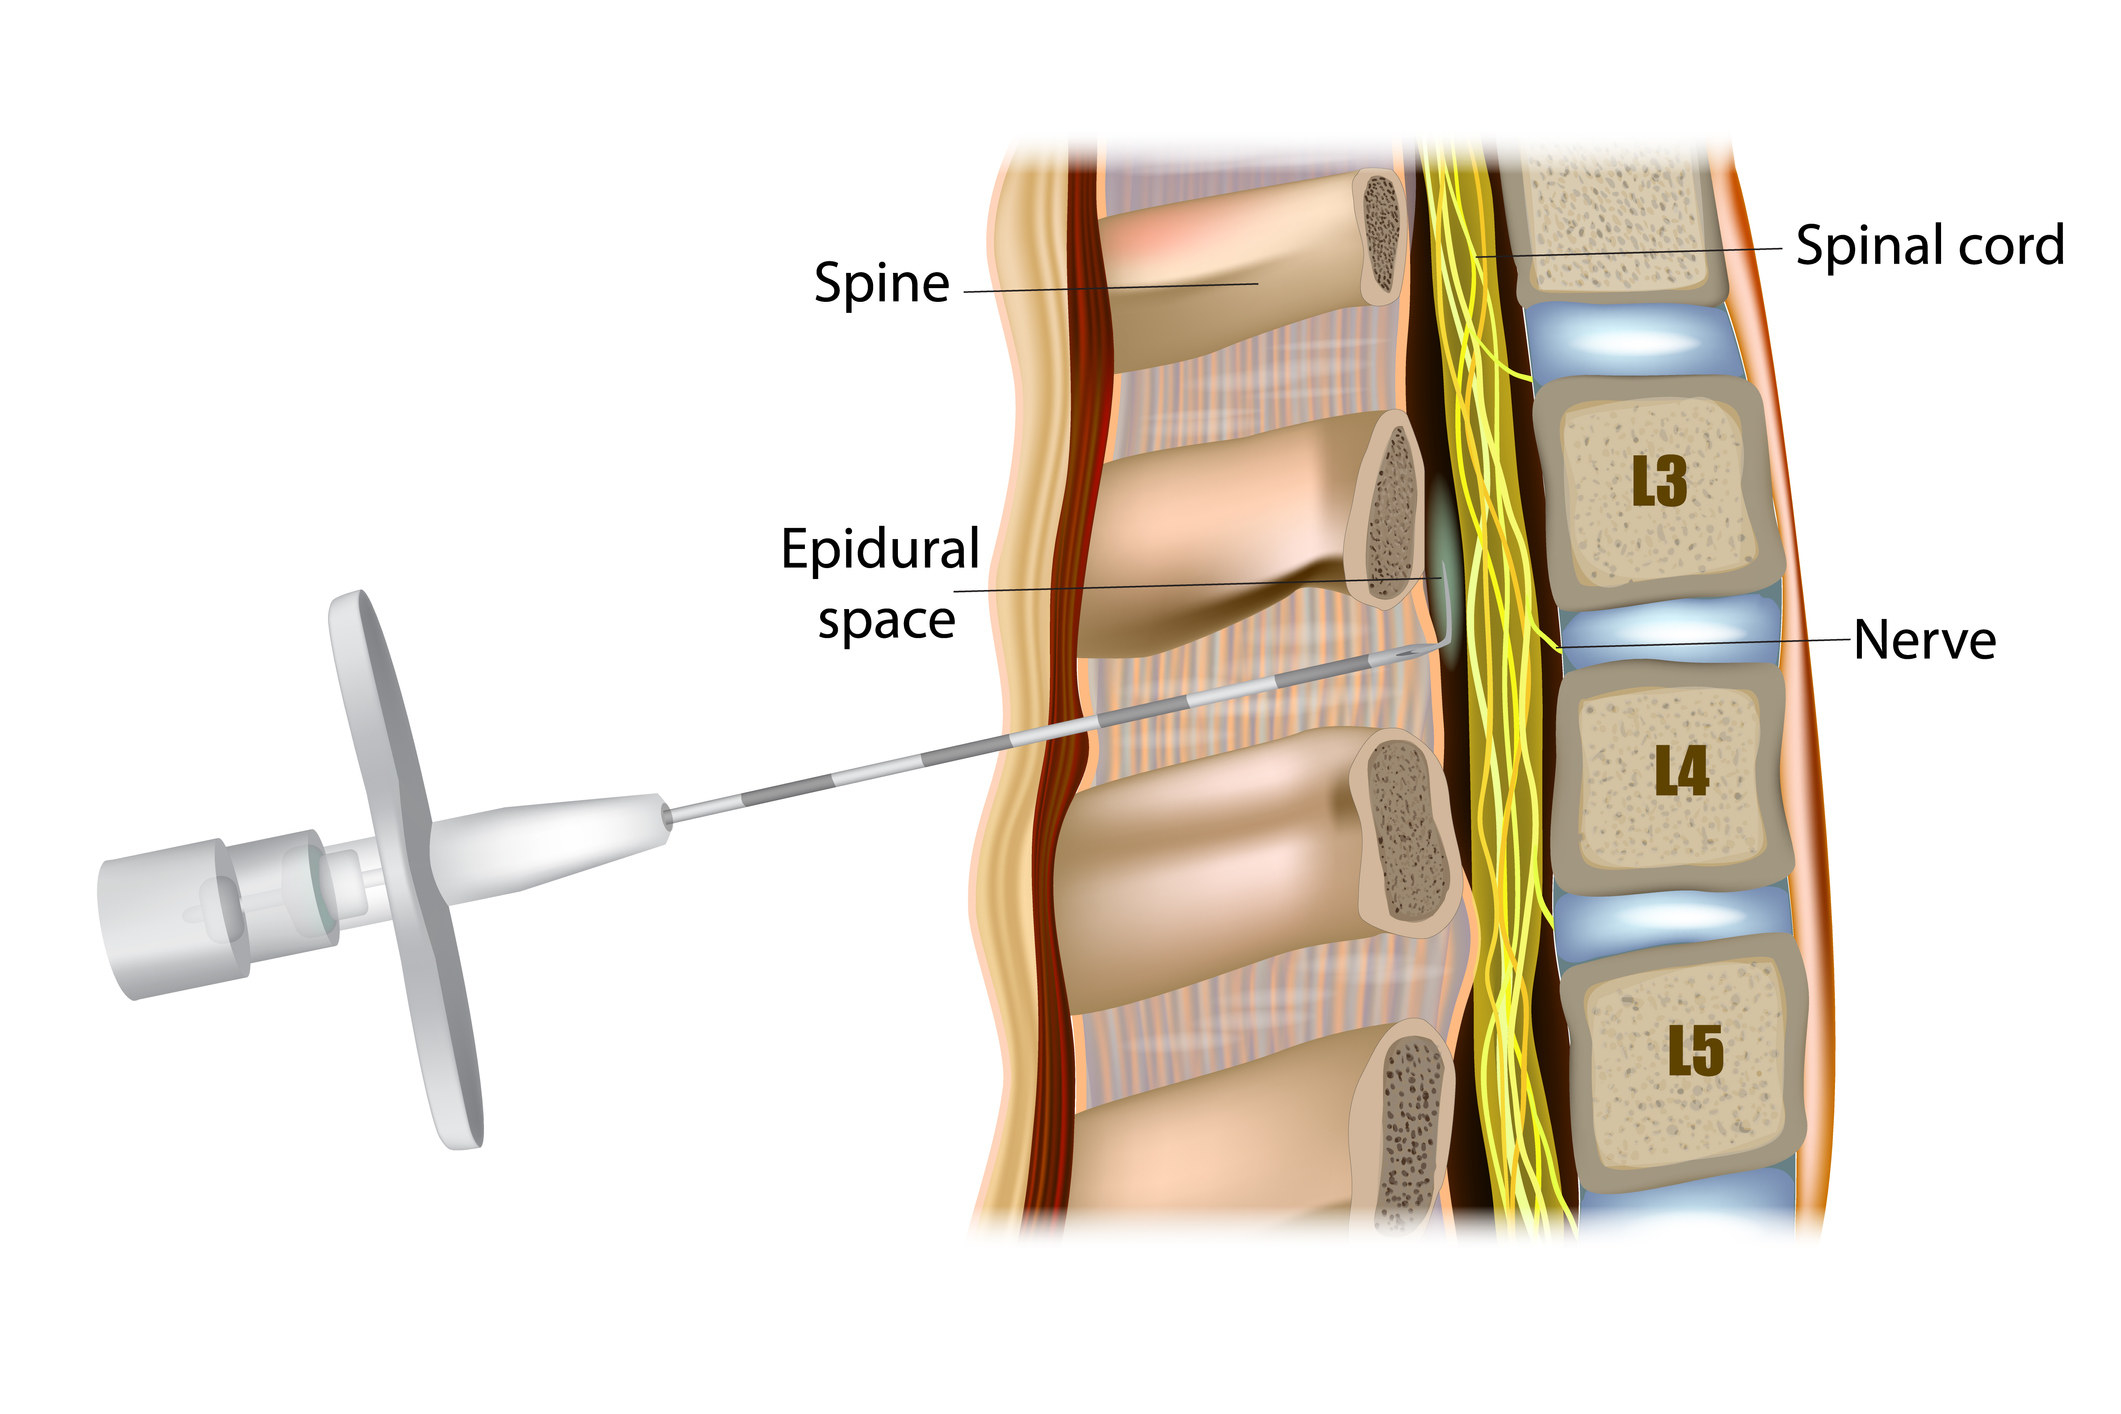 An illustration of a needle being inserted into the epidural space by the spinal cord